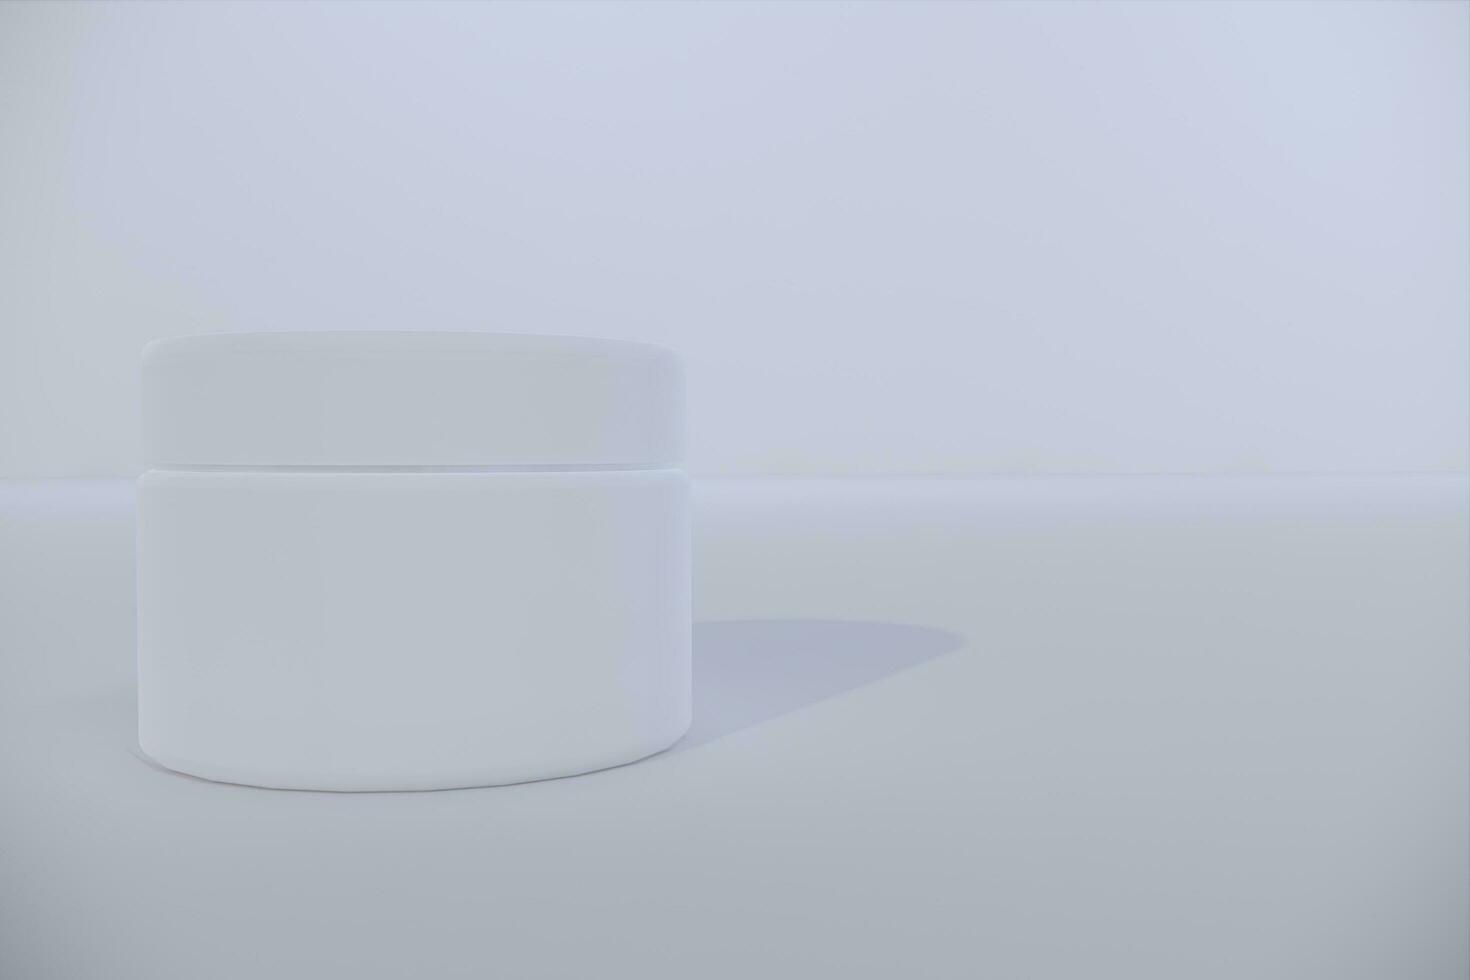 White blank glossy cosmetic plastic jar mock up template on isolated white background, cosmetic container for body cream, gel, butter, bath salt, skin care, powder. 3D illustration photo